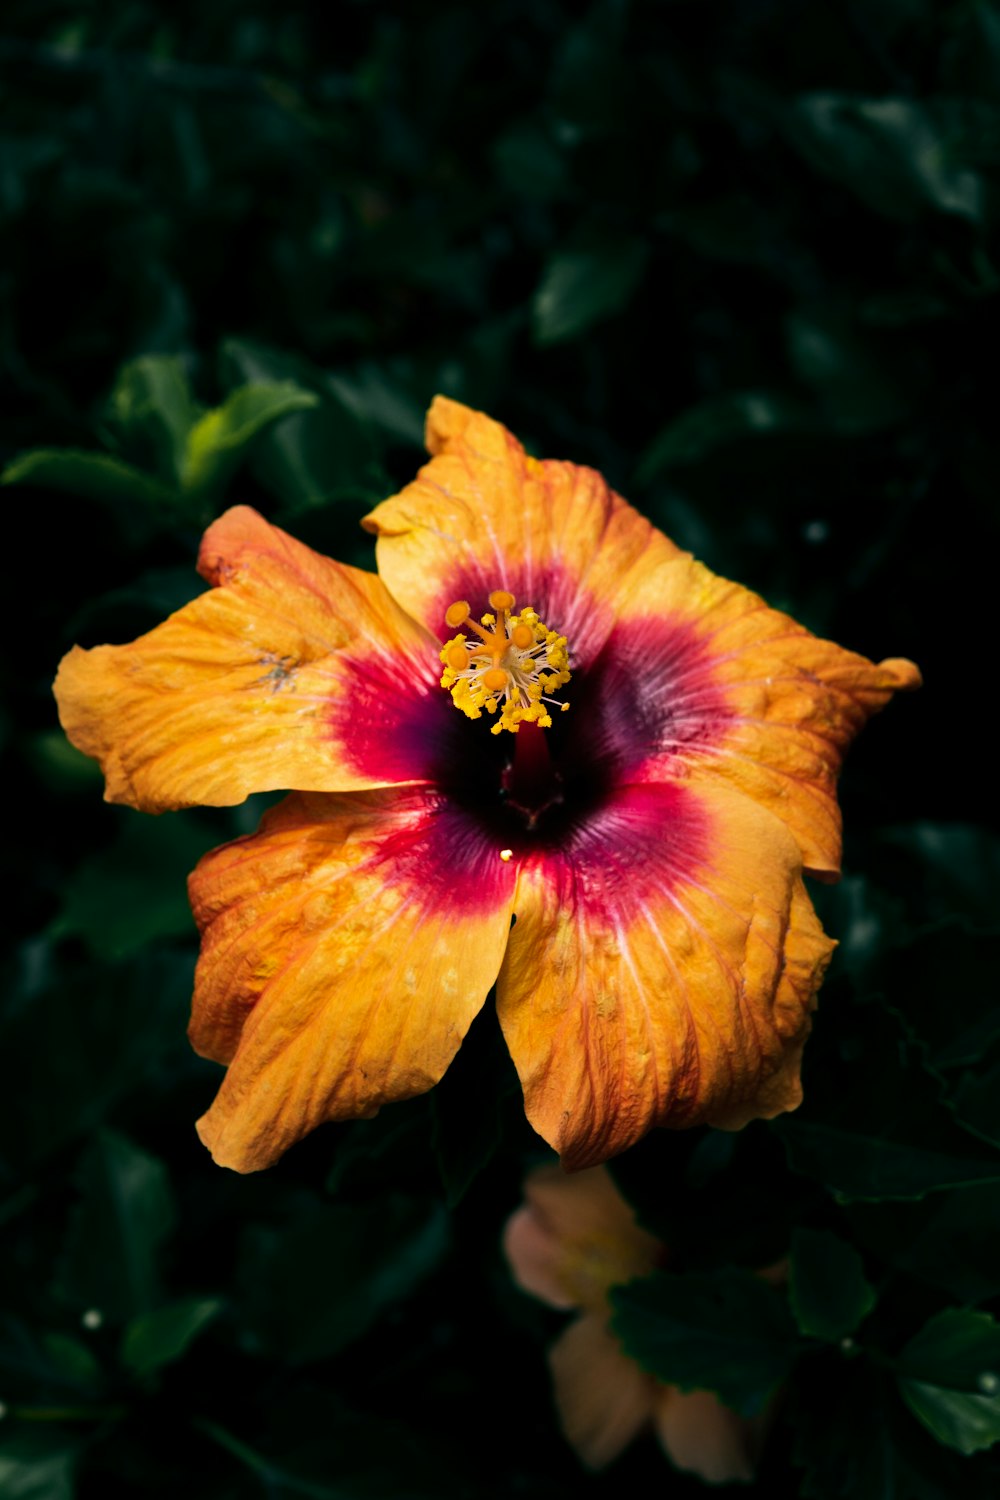 yellow and pink hibiscus in bloom during daytime